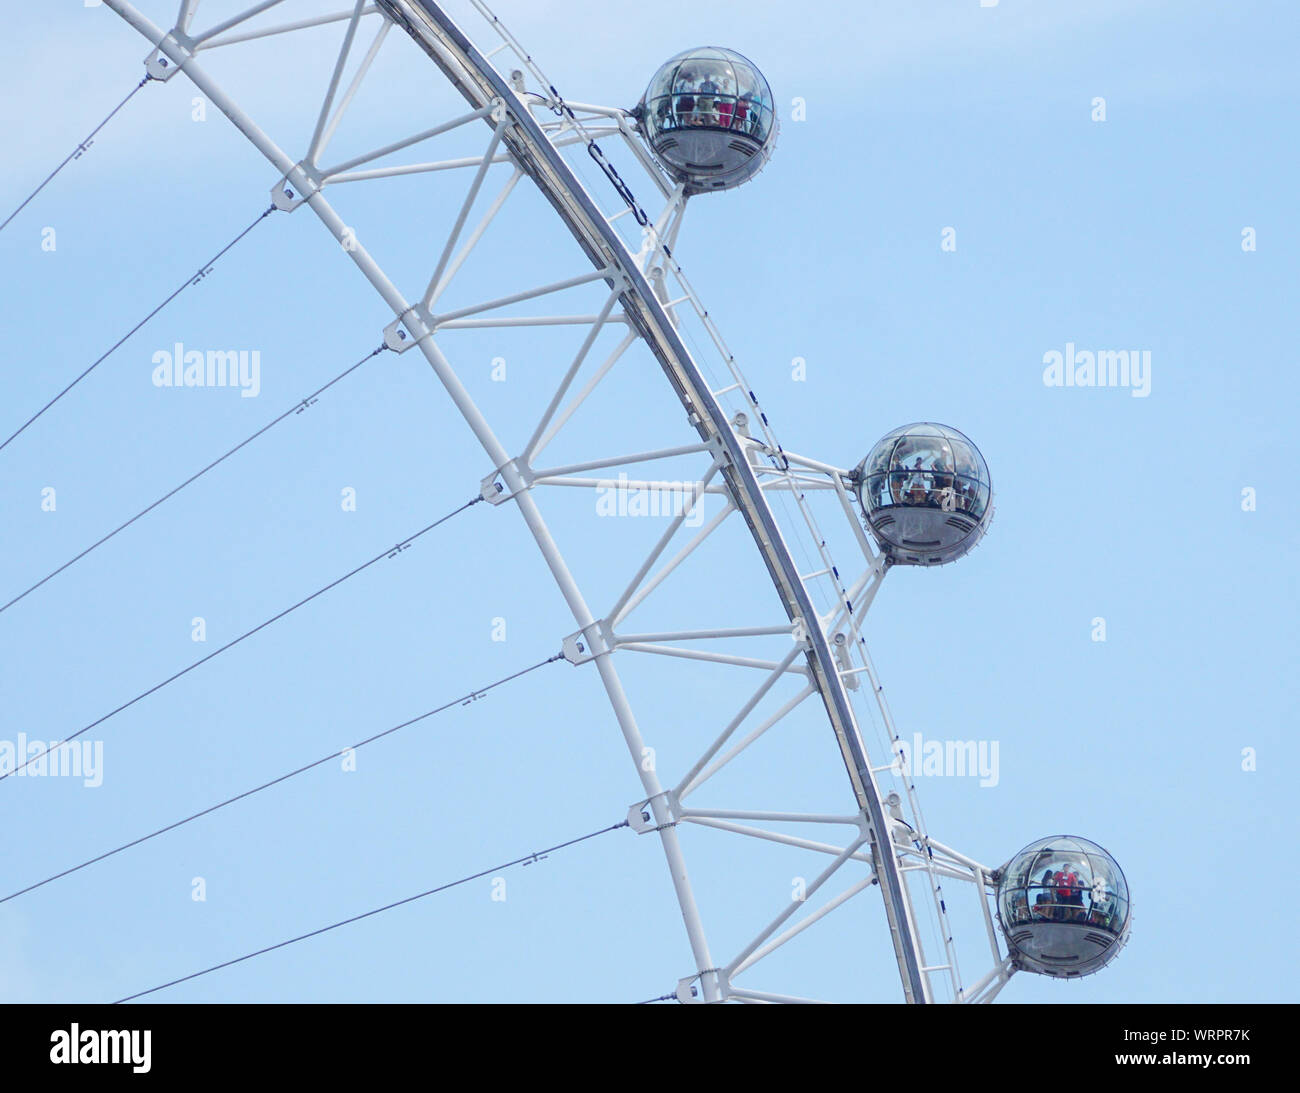 This photo is taken from the Downing Street as the wheel of The London Eye is pictured on a sunny day in  Westminster. Stock Photo